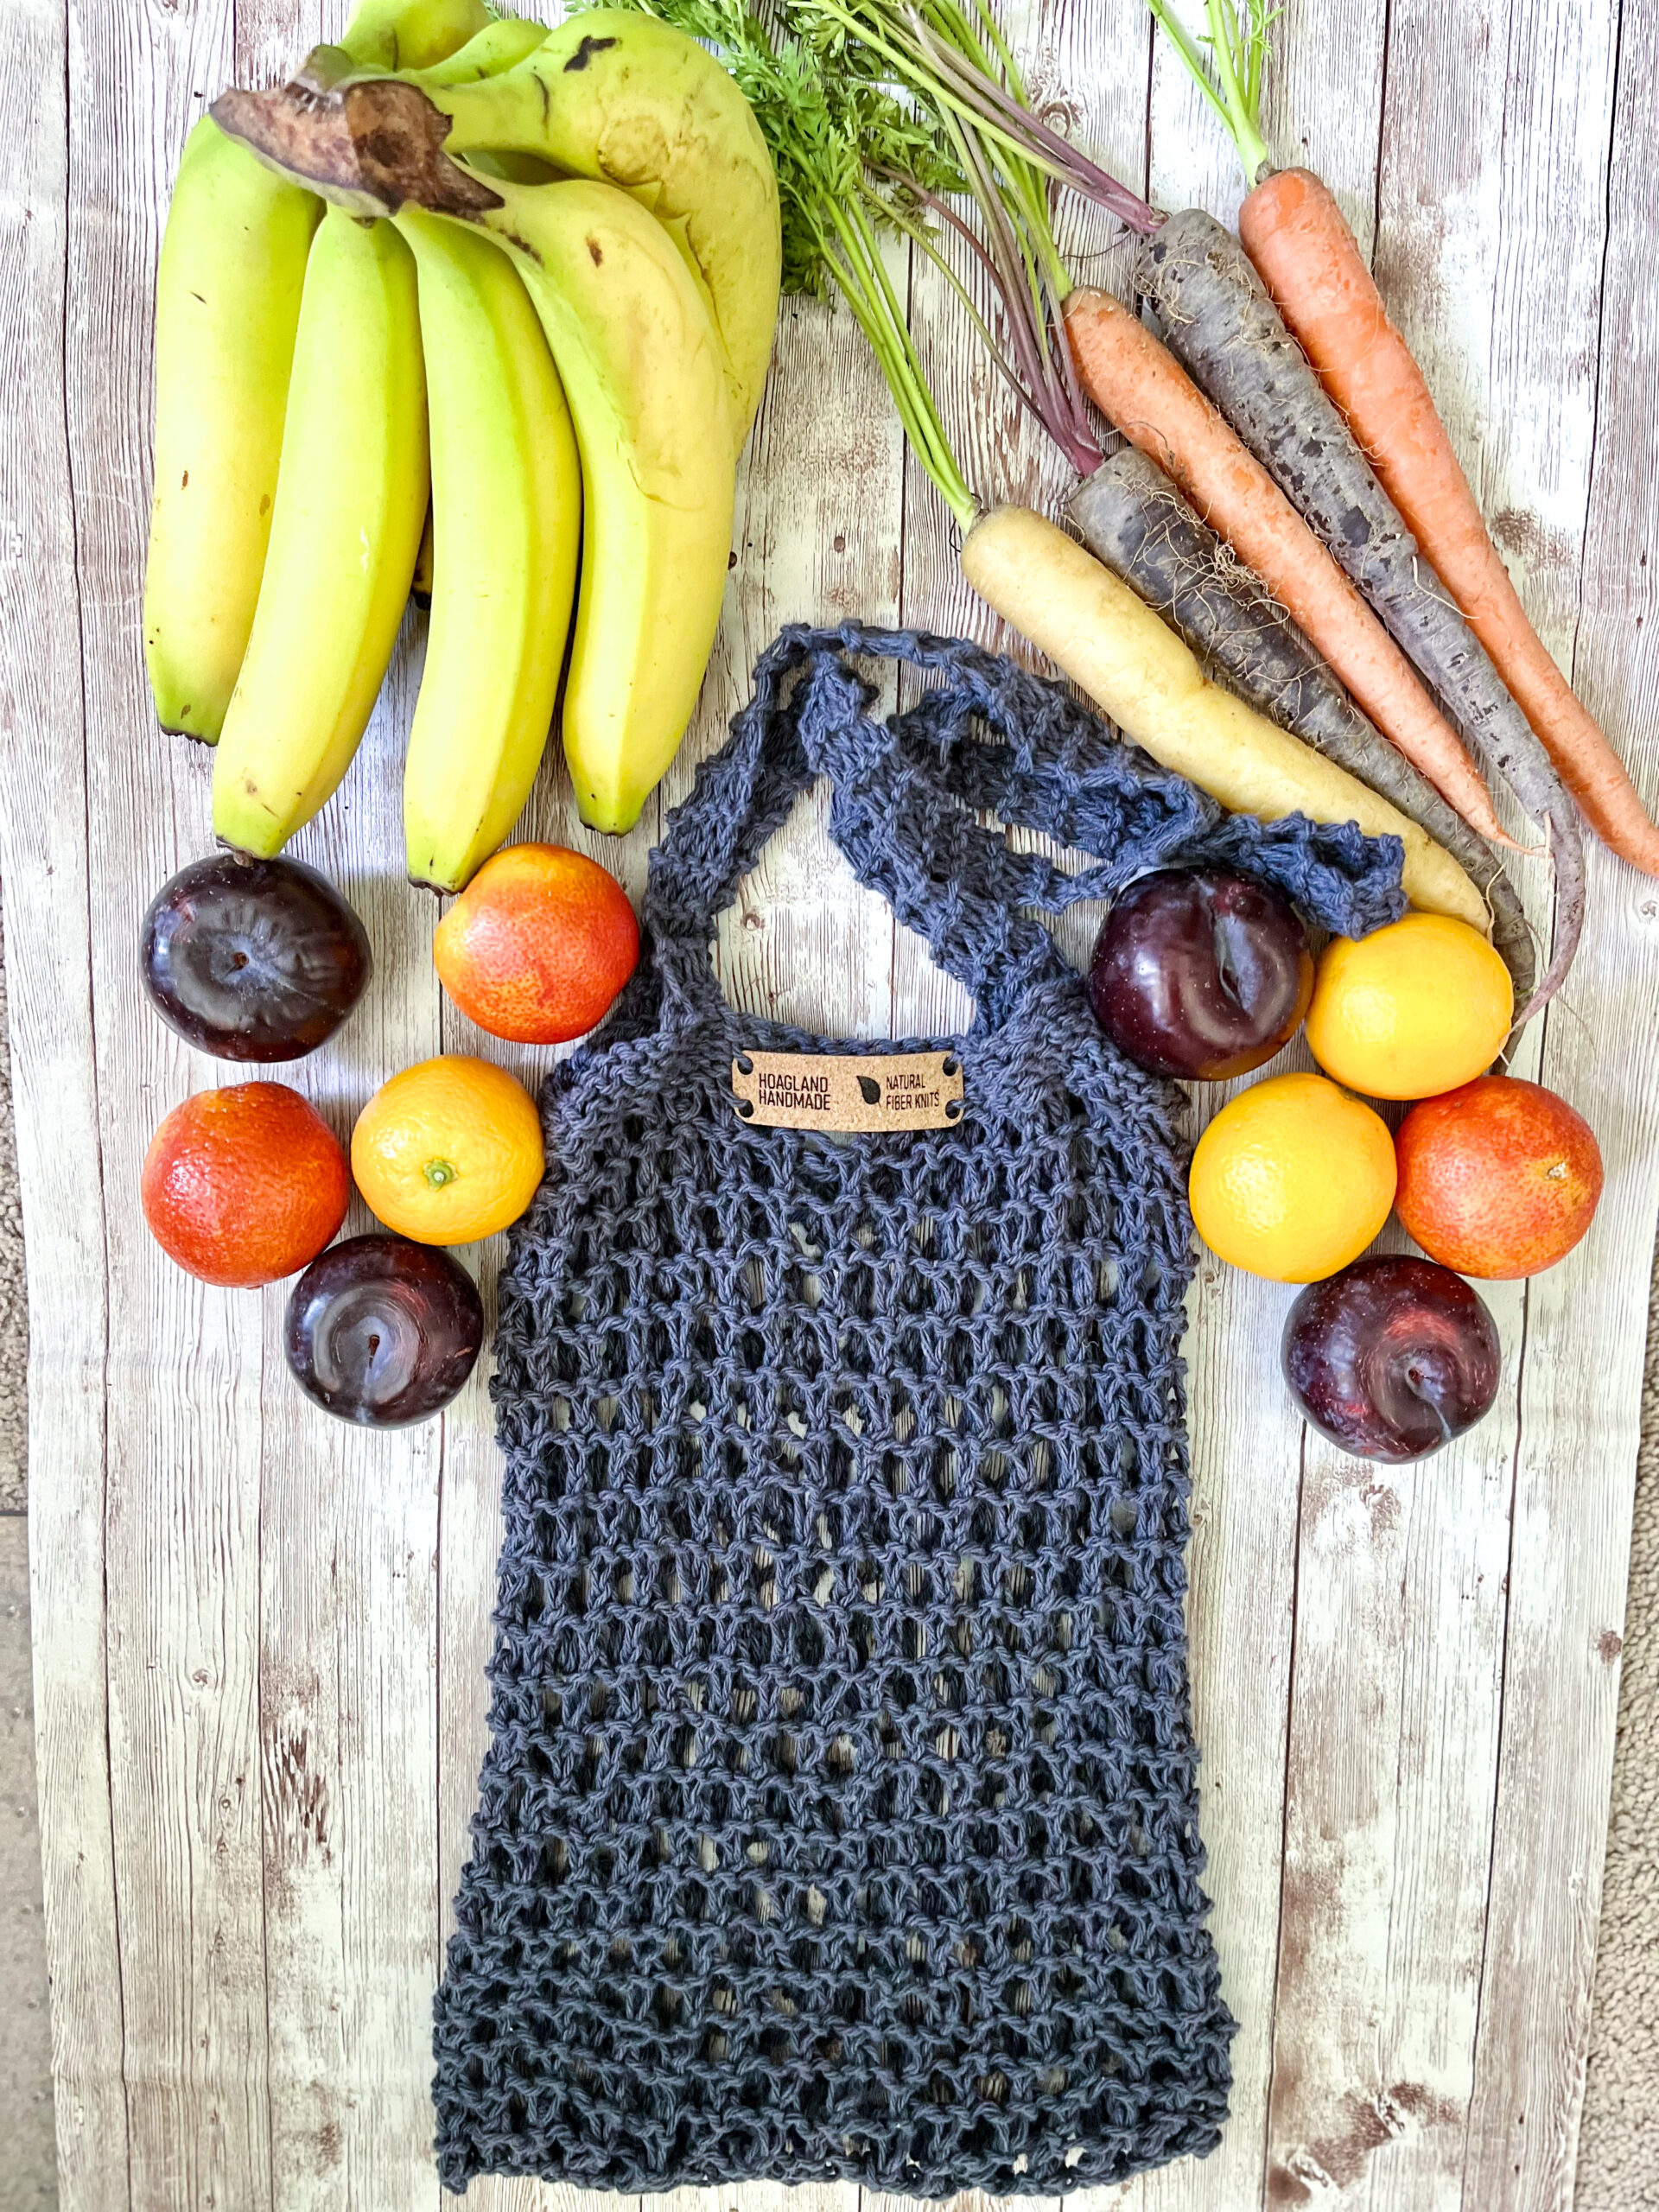 A dark blue recycled cotton mesh tote bag is surrounded by bananas, rainbow carrots, plums, and oranges